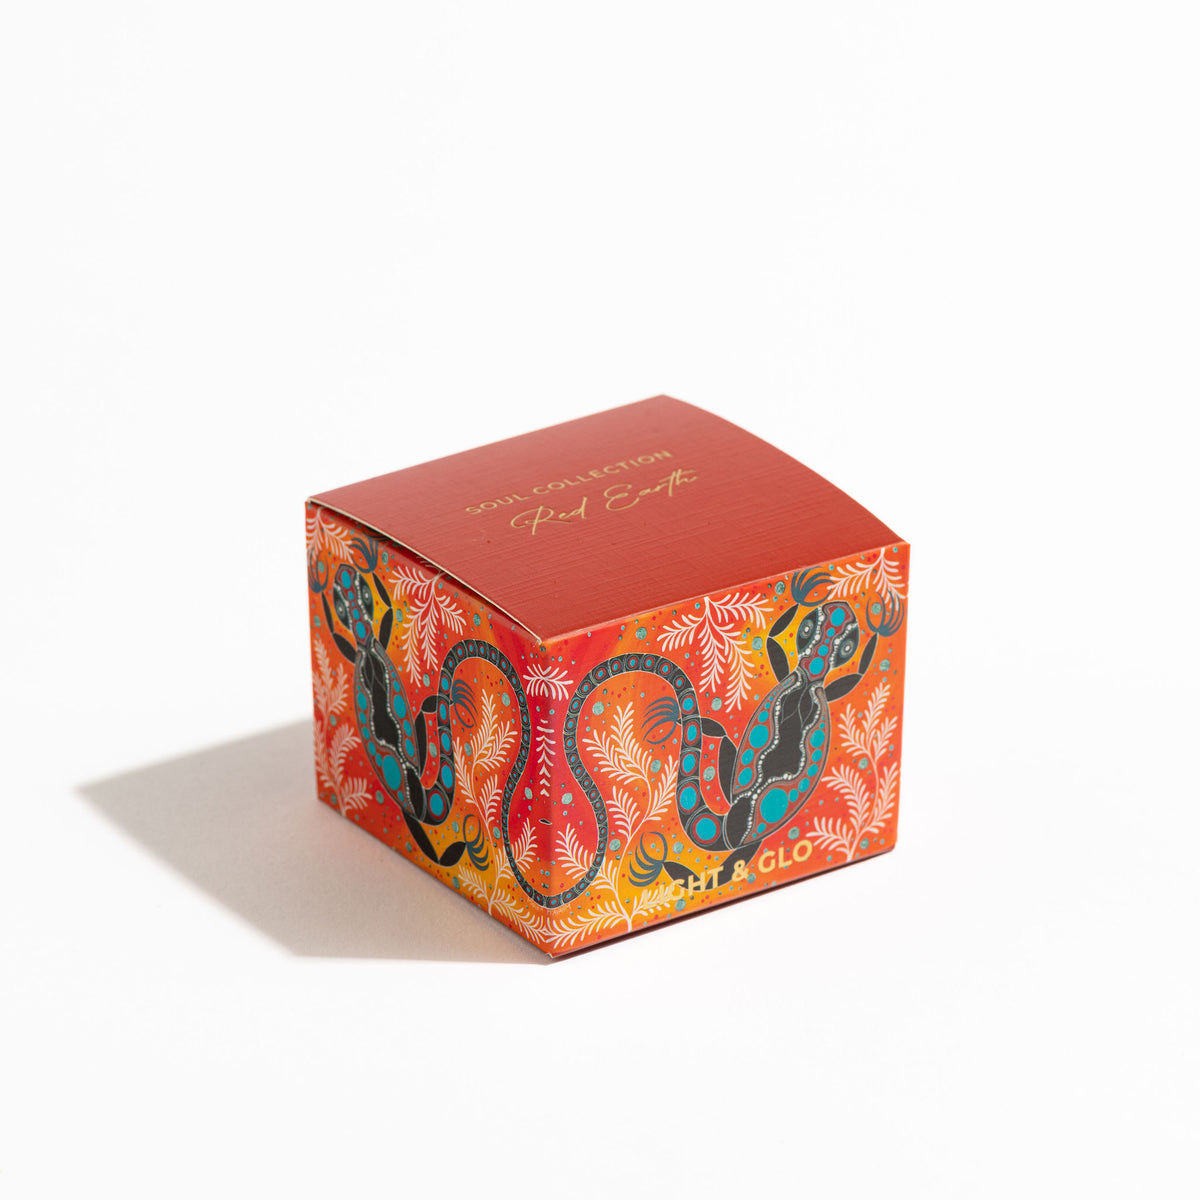 Soul Australiana Travel Candle - Red Earth | Luxury Candles &amp; Home Fragrances by Light + Glo